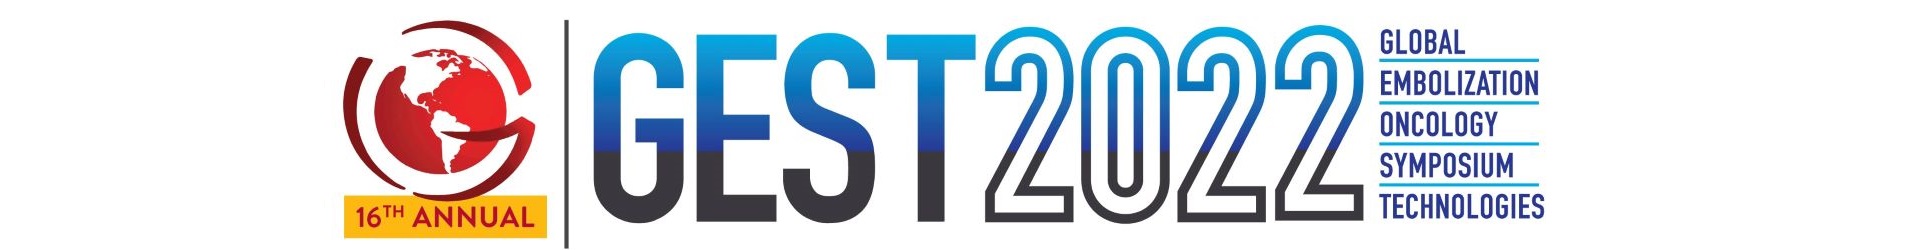 GEST 2022 Event Banner